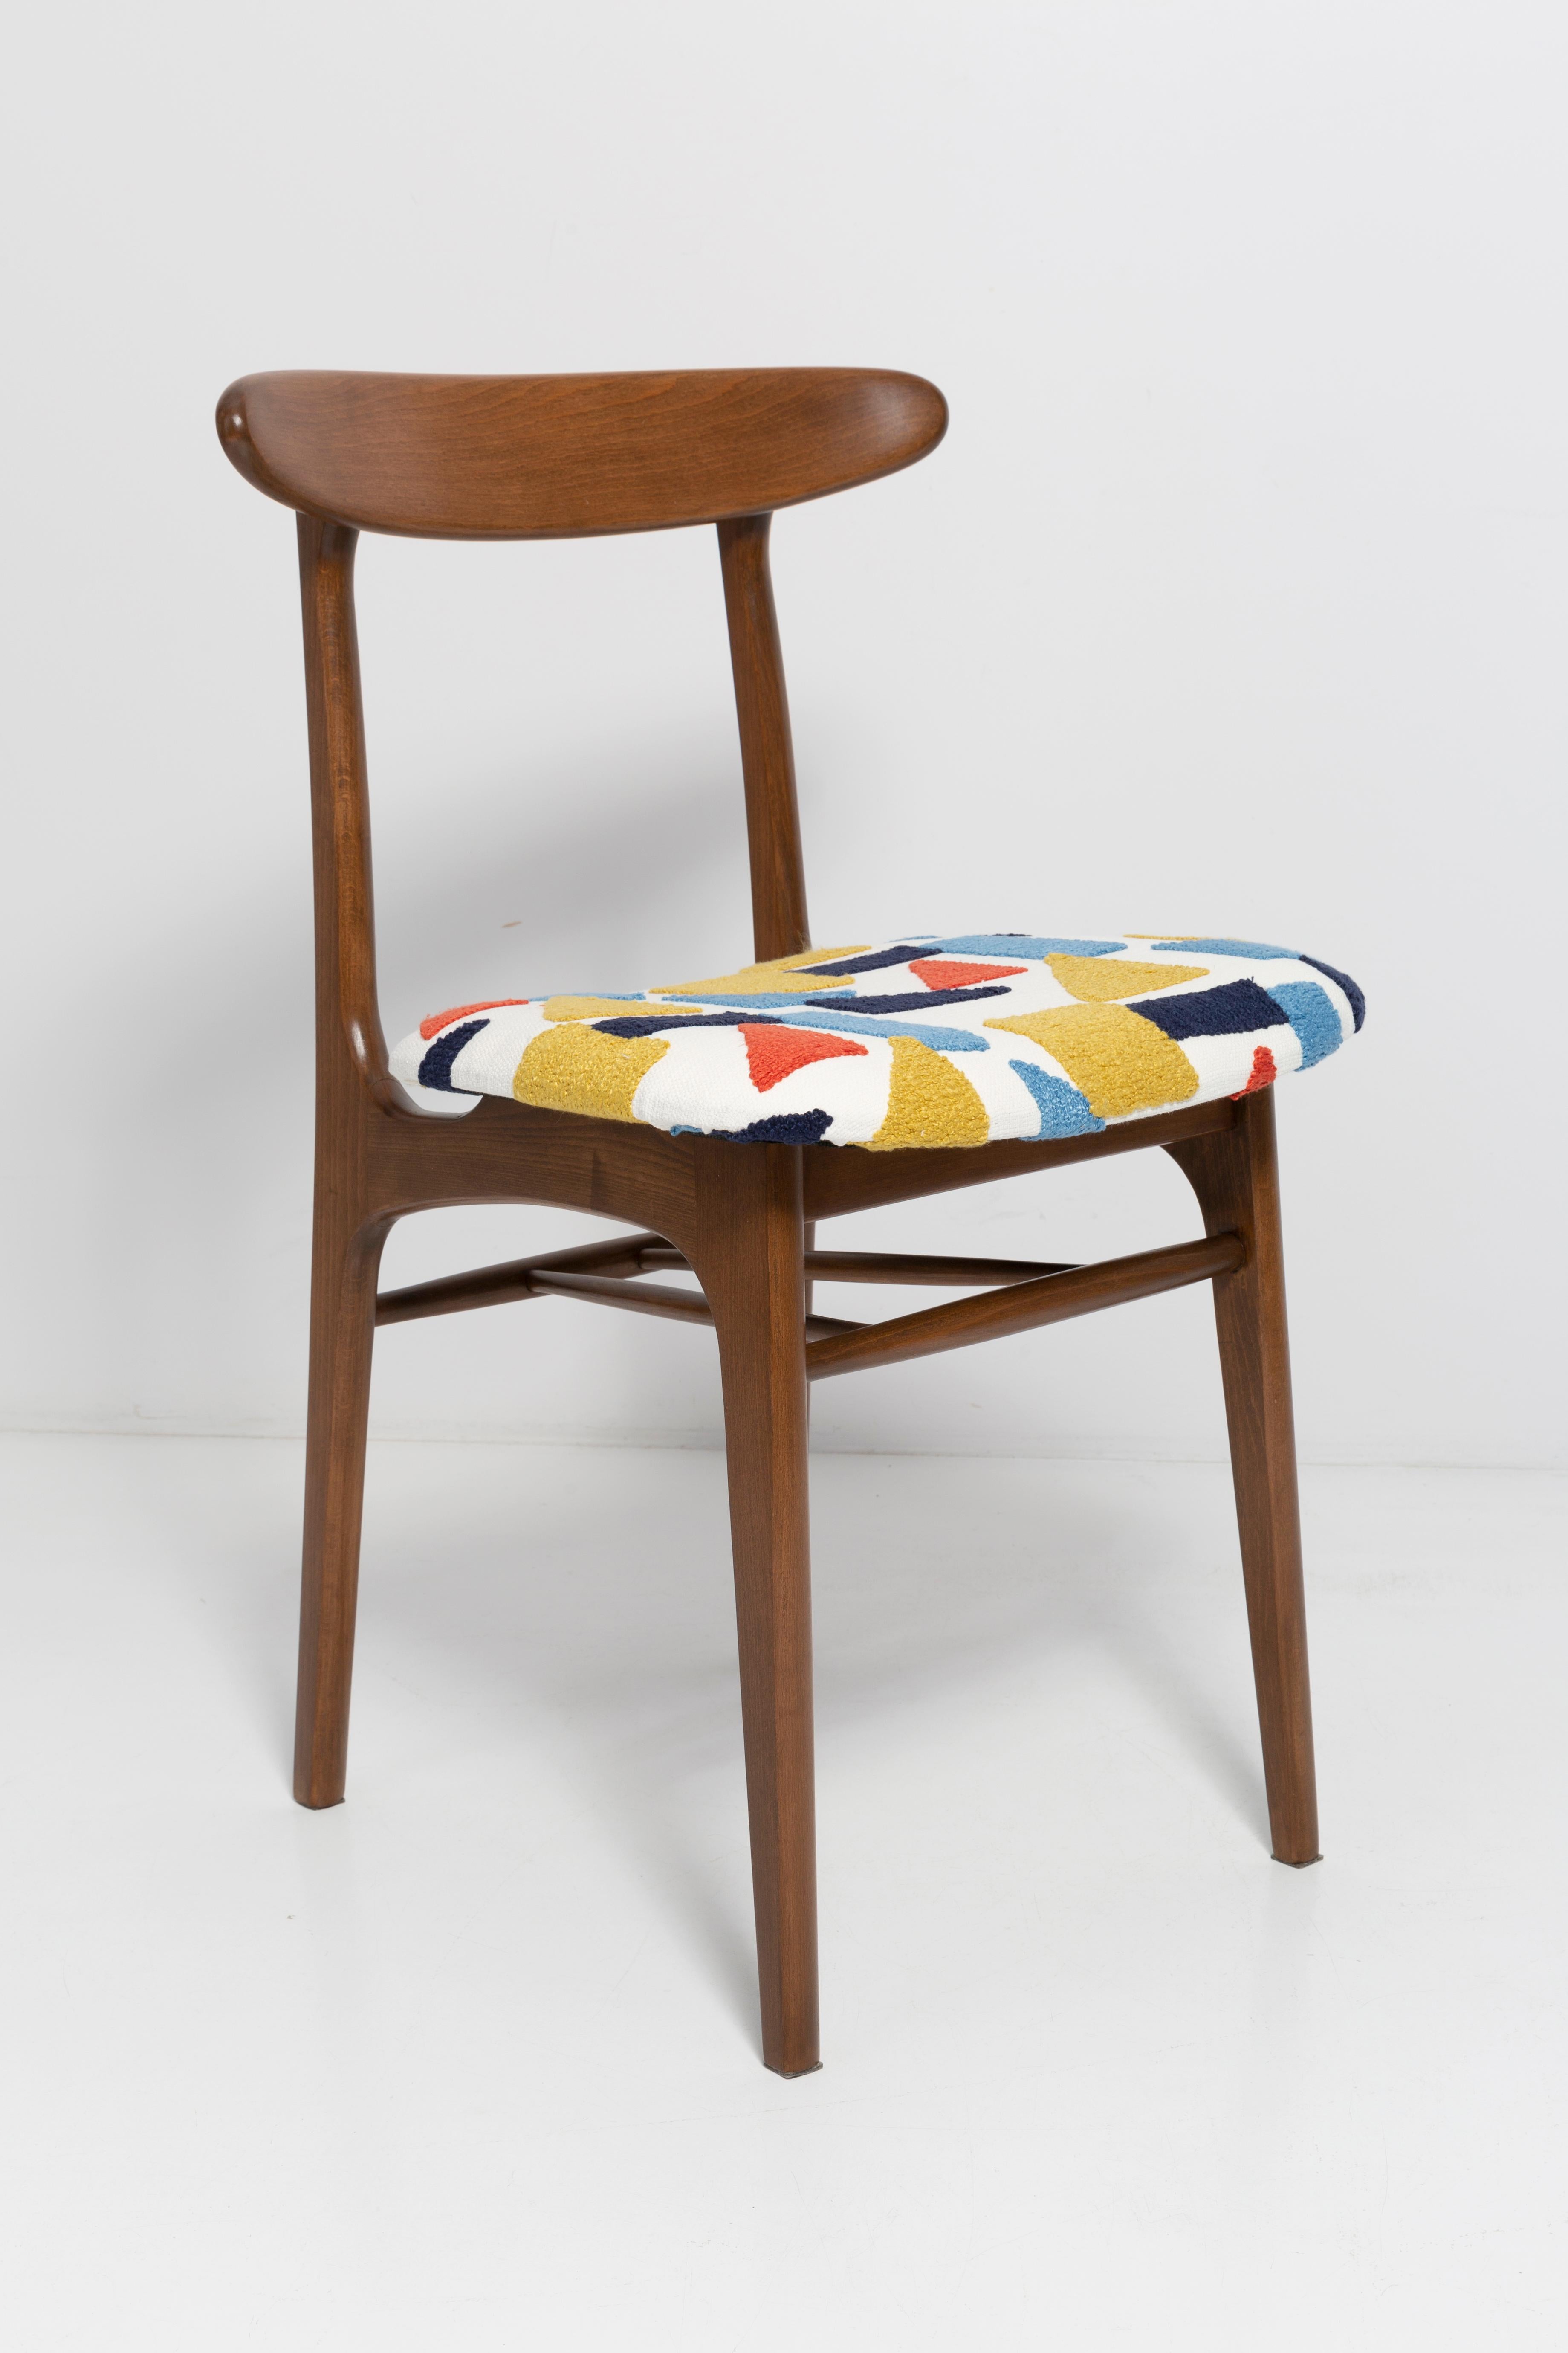 Chair designed by Prof. Rajmund Halas. Made of beechwood. Chair is after a complete upholstery renovation, the woodwork has been refreshed. Seat is dressed in white, durable and pleasant to the touch unique spanish fabric. Chair is stable and very